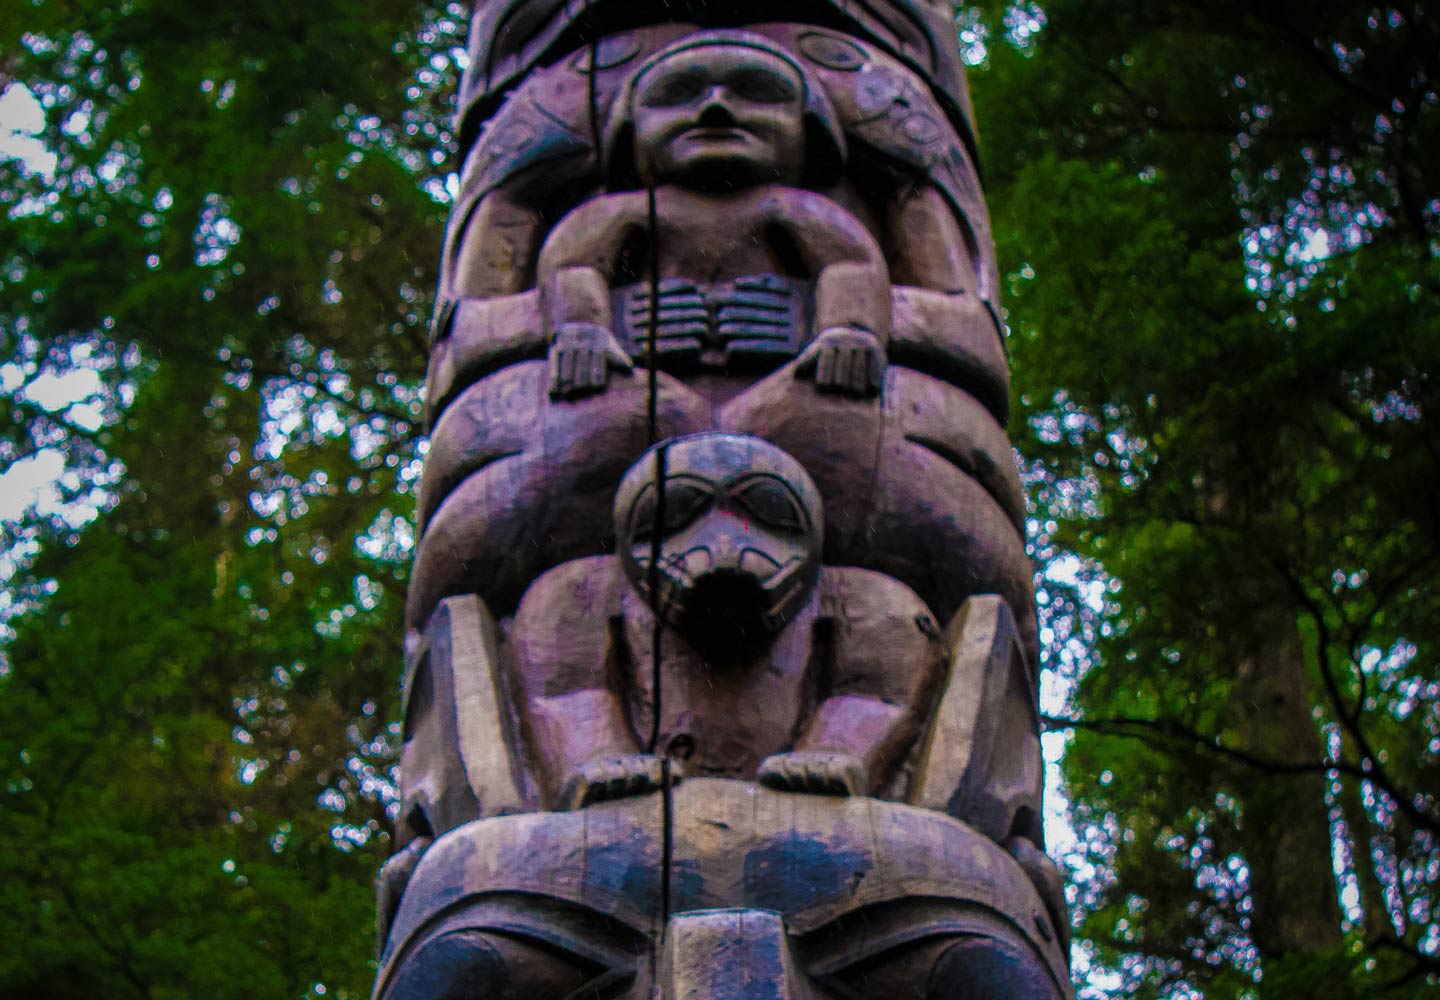 The local totem park is a stunning display of the native history of this area.